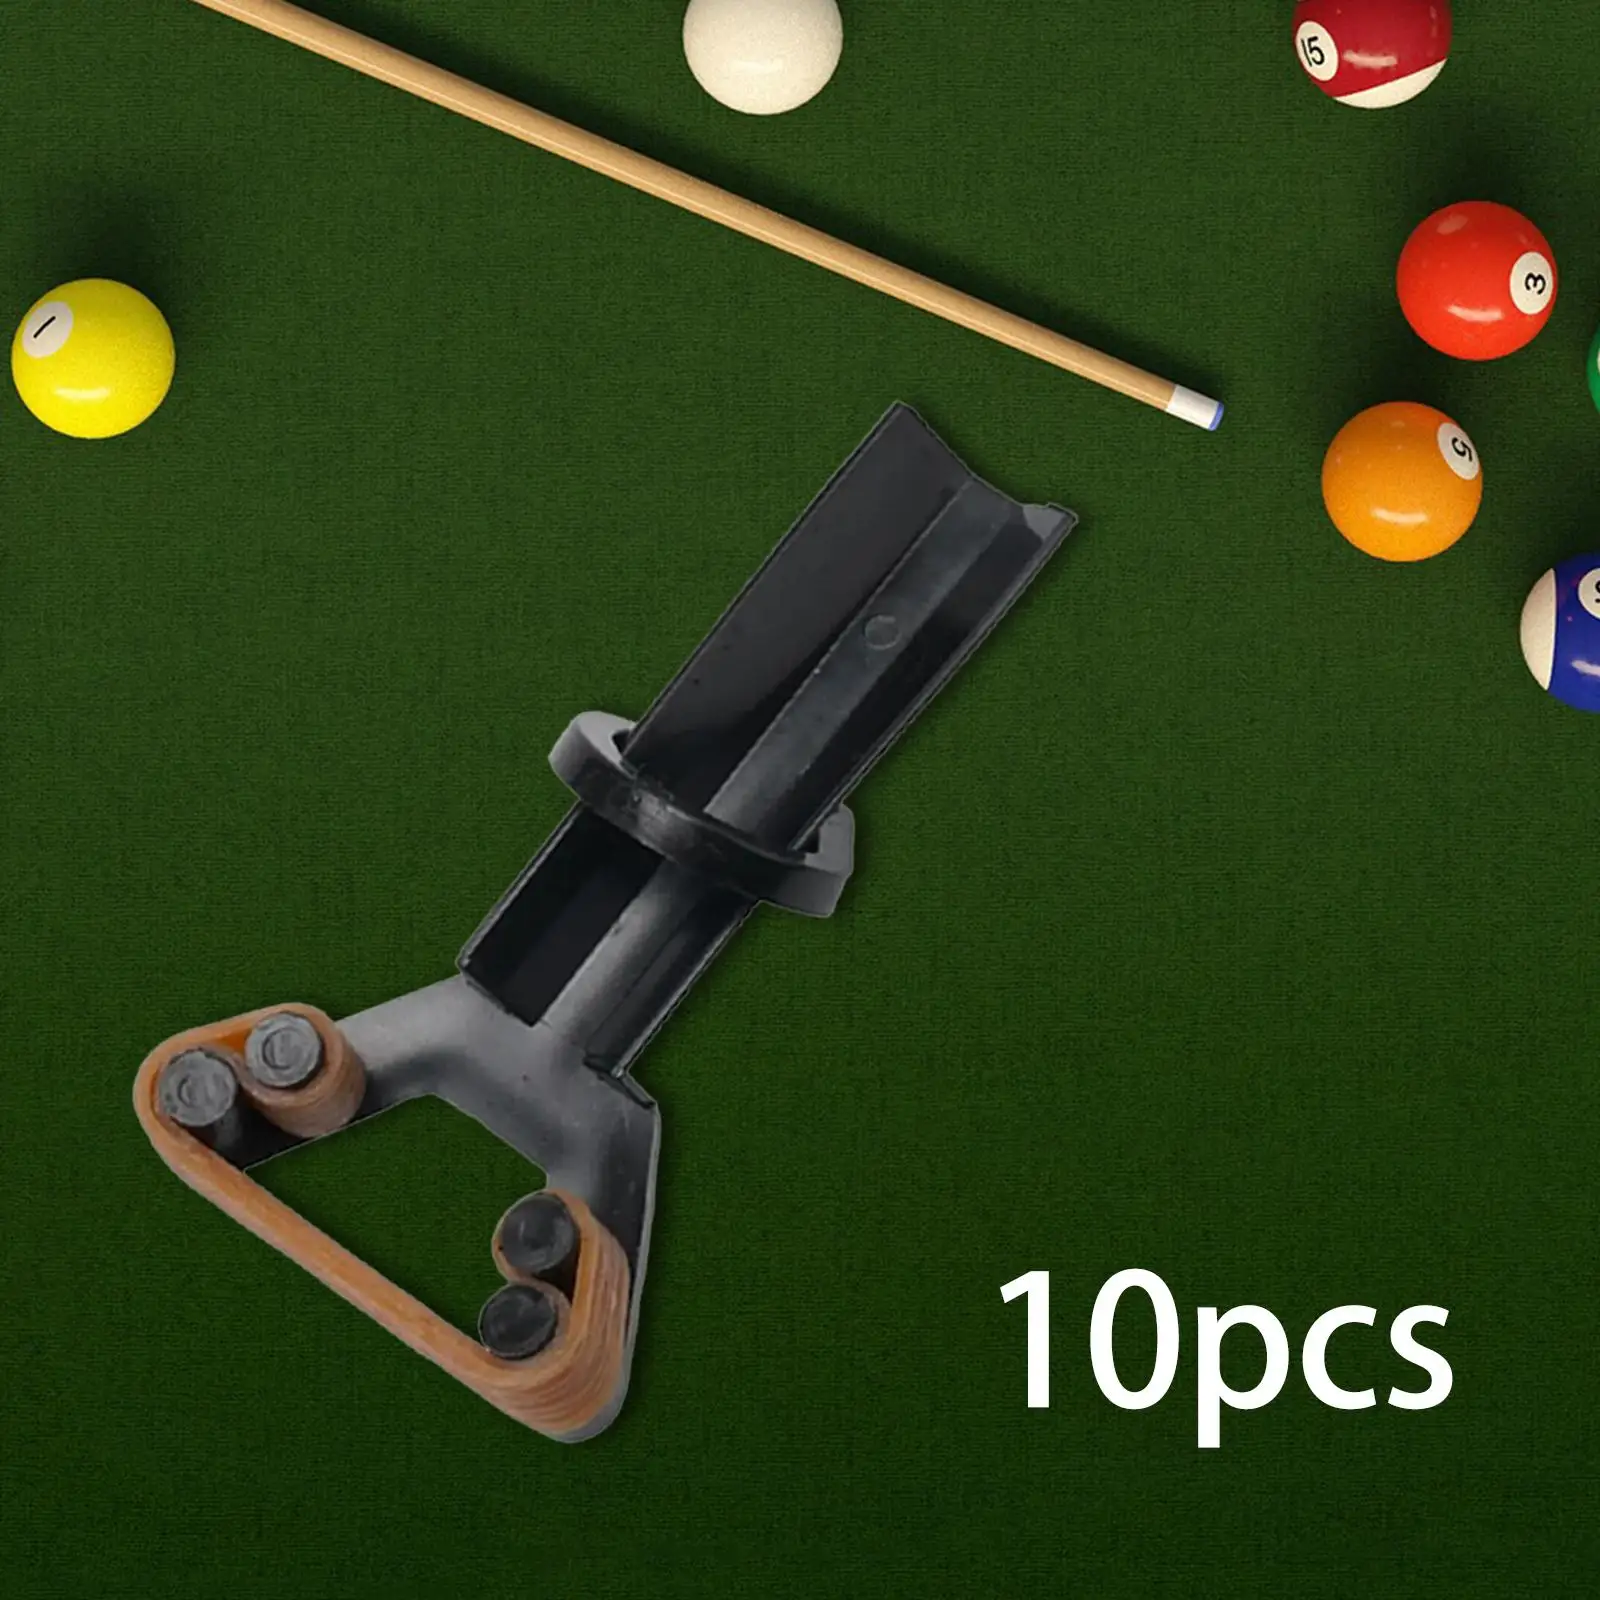 10Pcs Pool Cue Tip Clamp Adults Durable Billiards Cue Tip Fastener Repair Tool for Club Competition Billiard Player Party